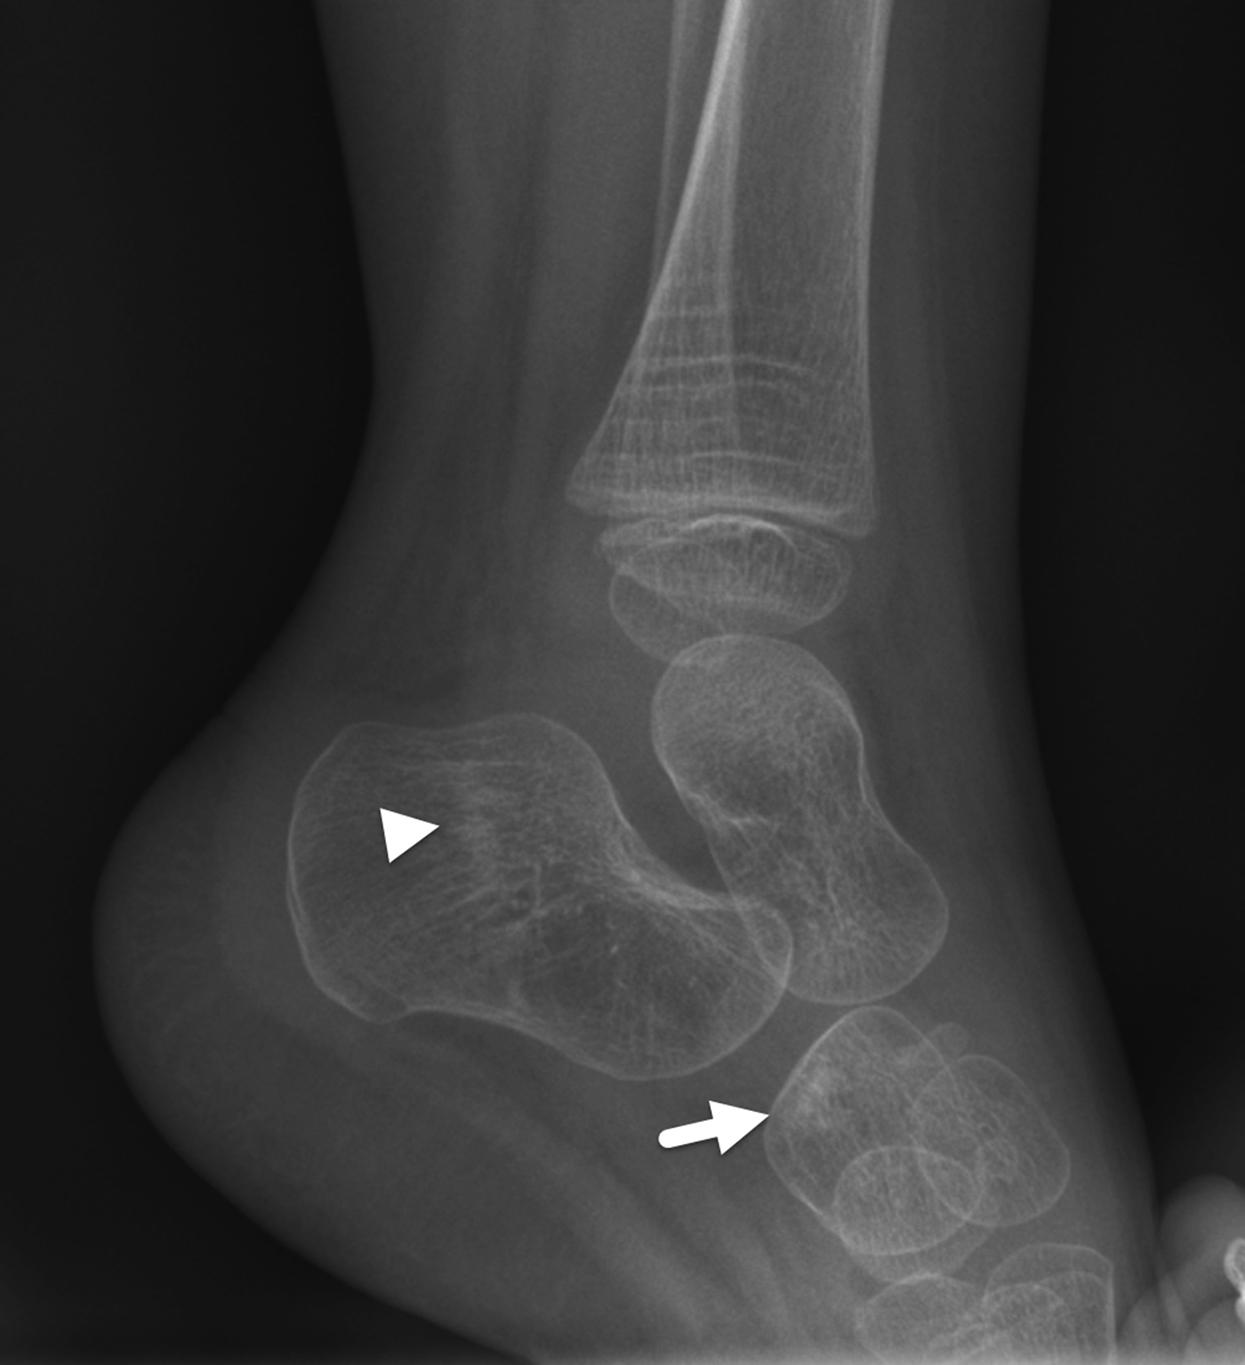 FIGURE 7-34, Stress fractures of the calcaneus and cuboid.